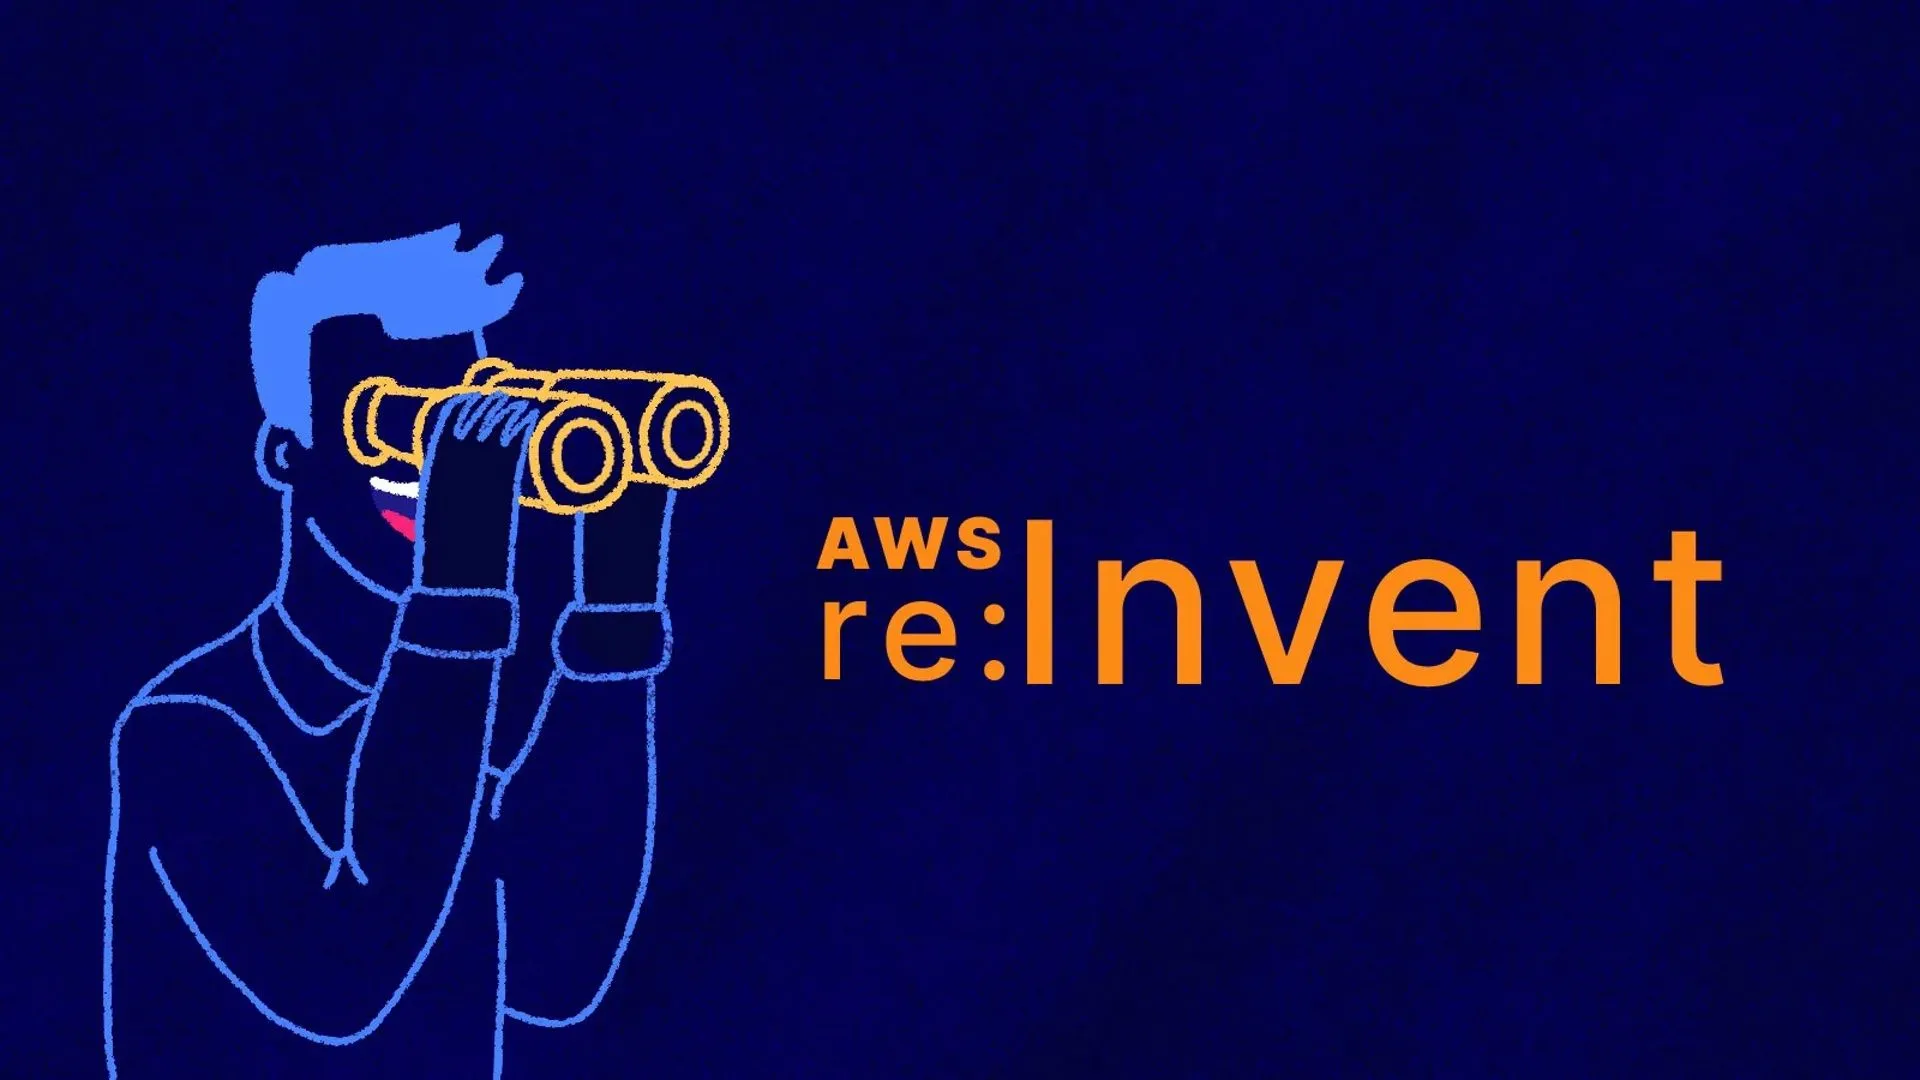 The Ultimate Guide to AWS re:Invent 2021